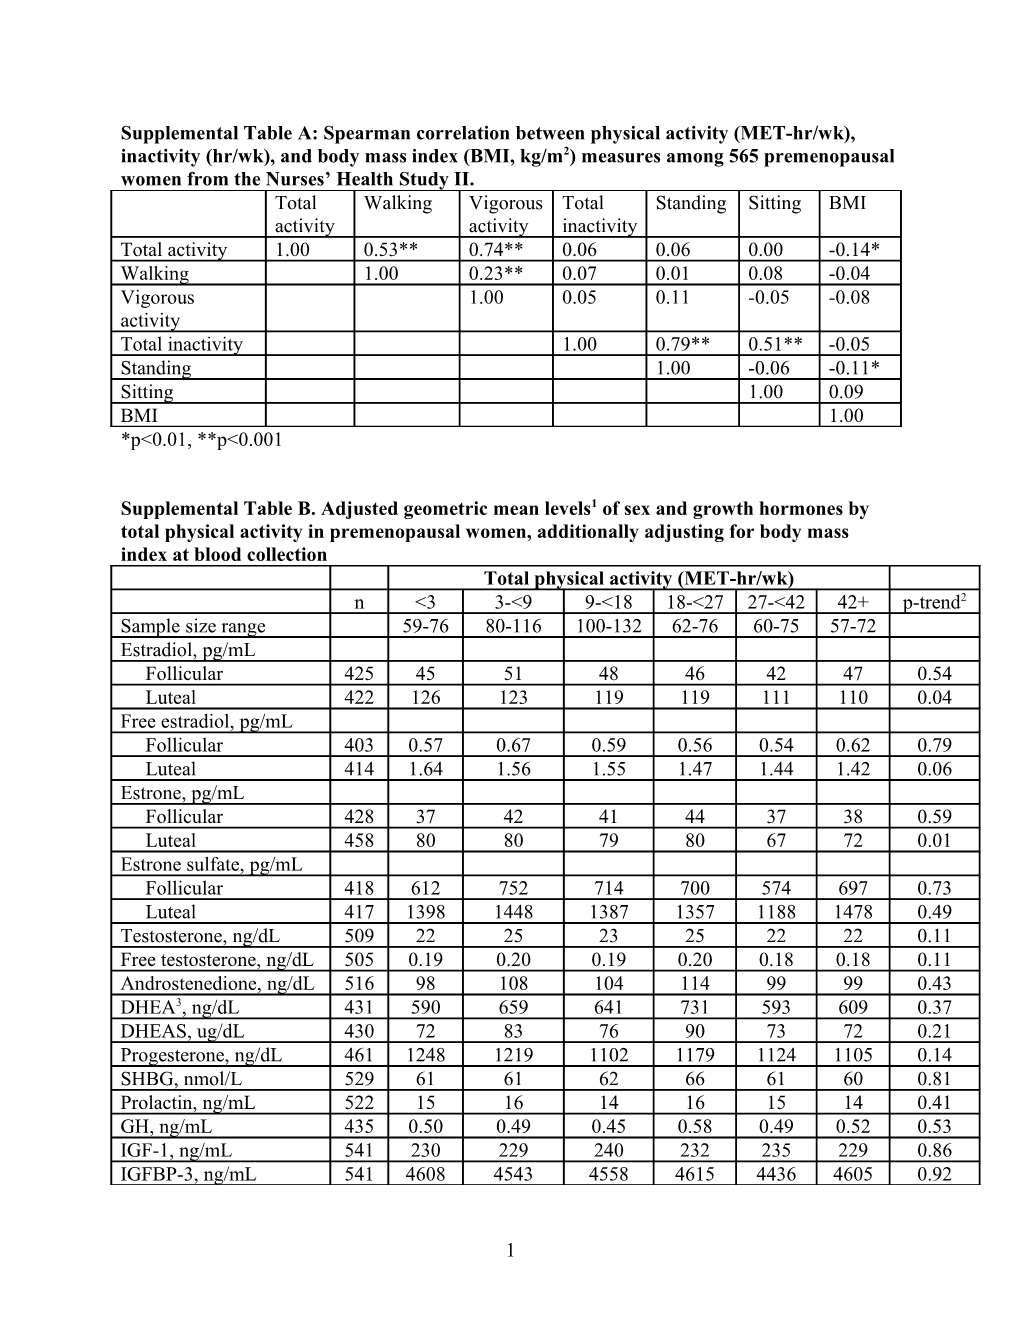 Supplemental Table A: Spearman Correlation Between Physical Activity (MET-Hr/Wk), Inactivity